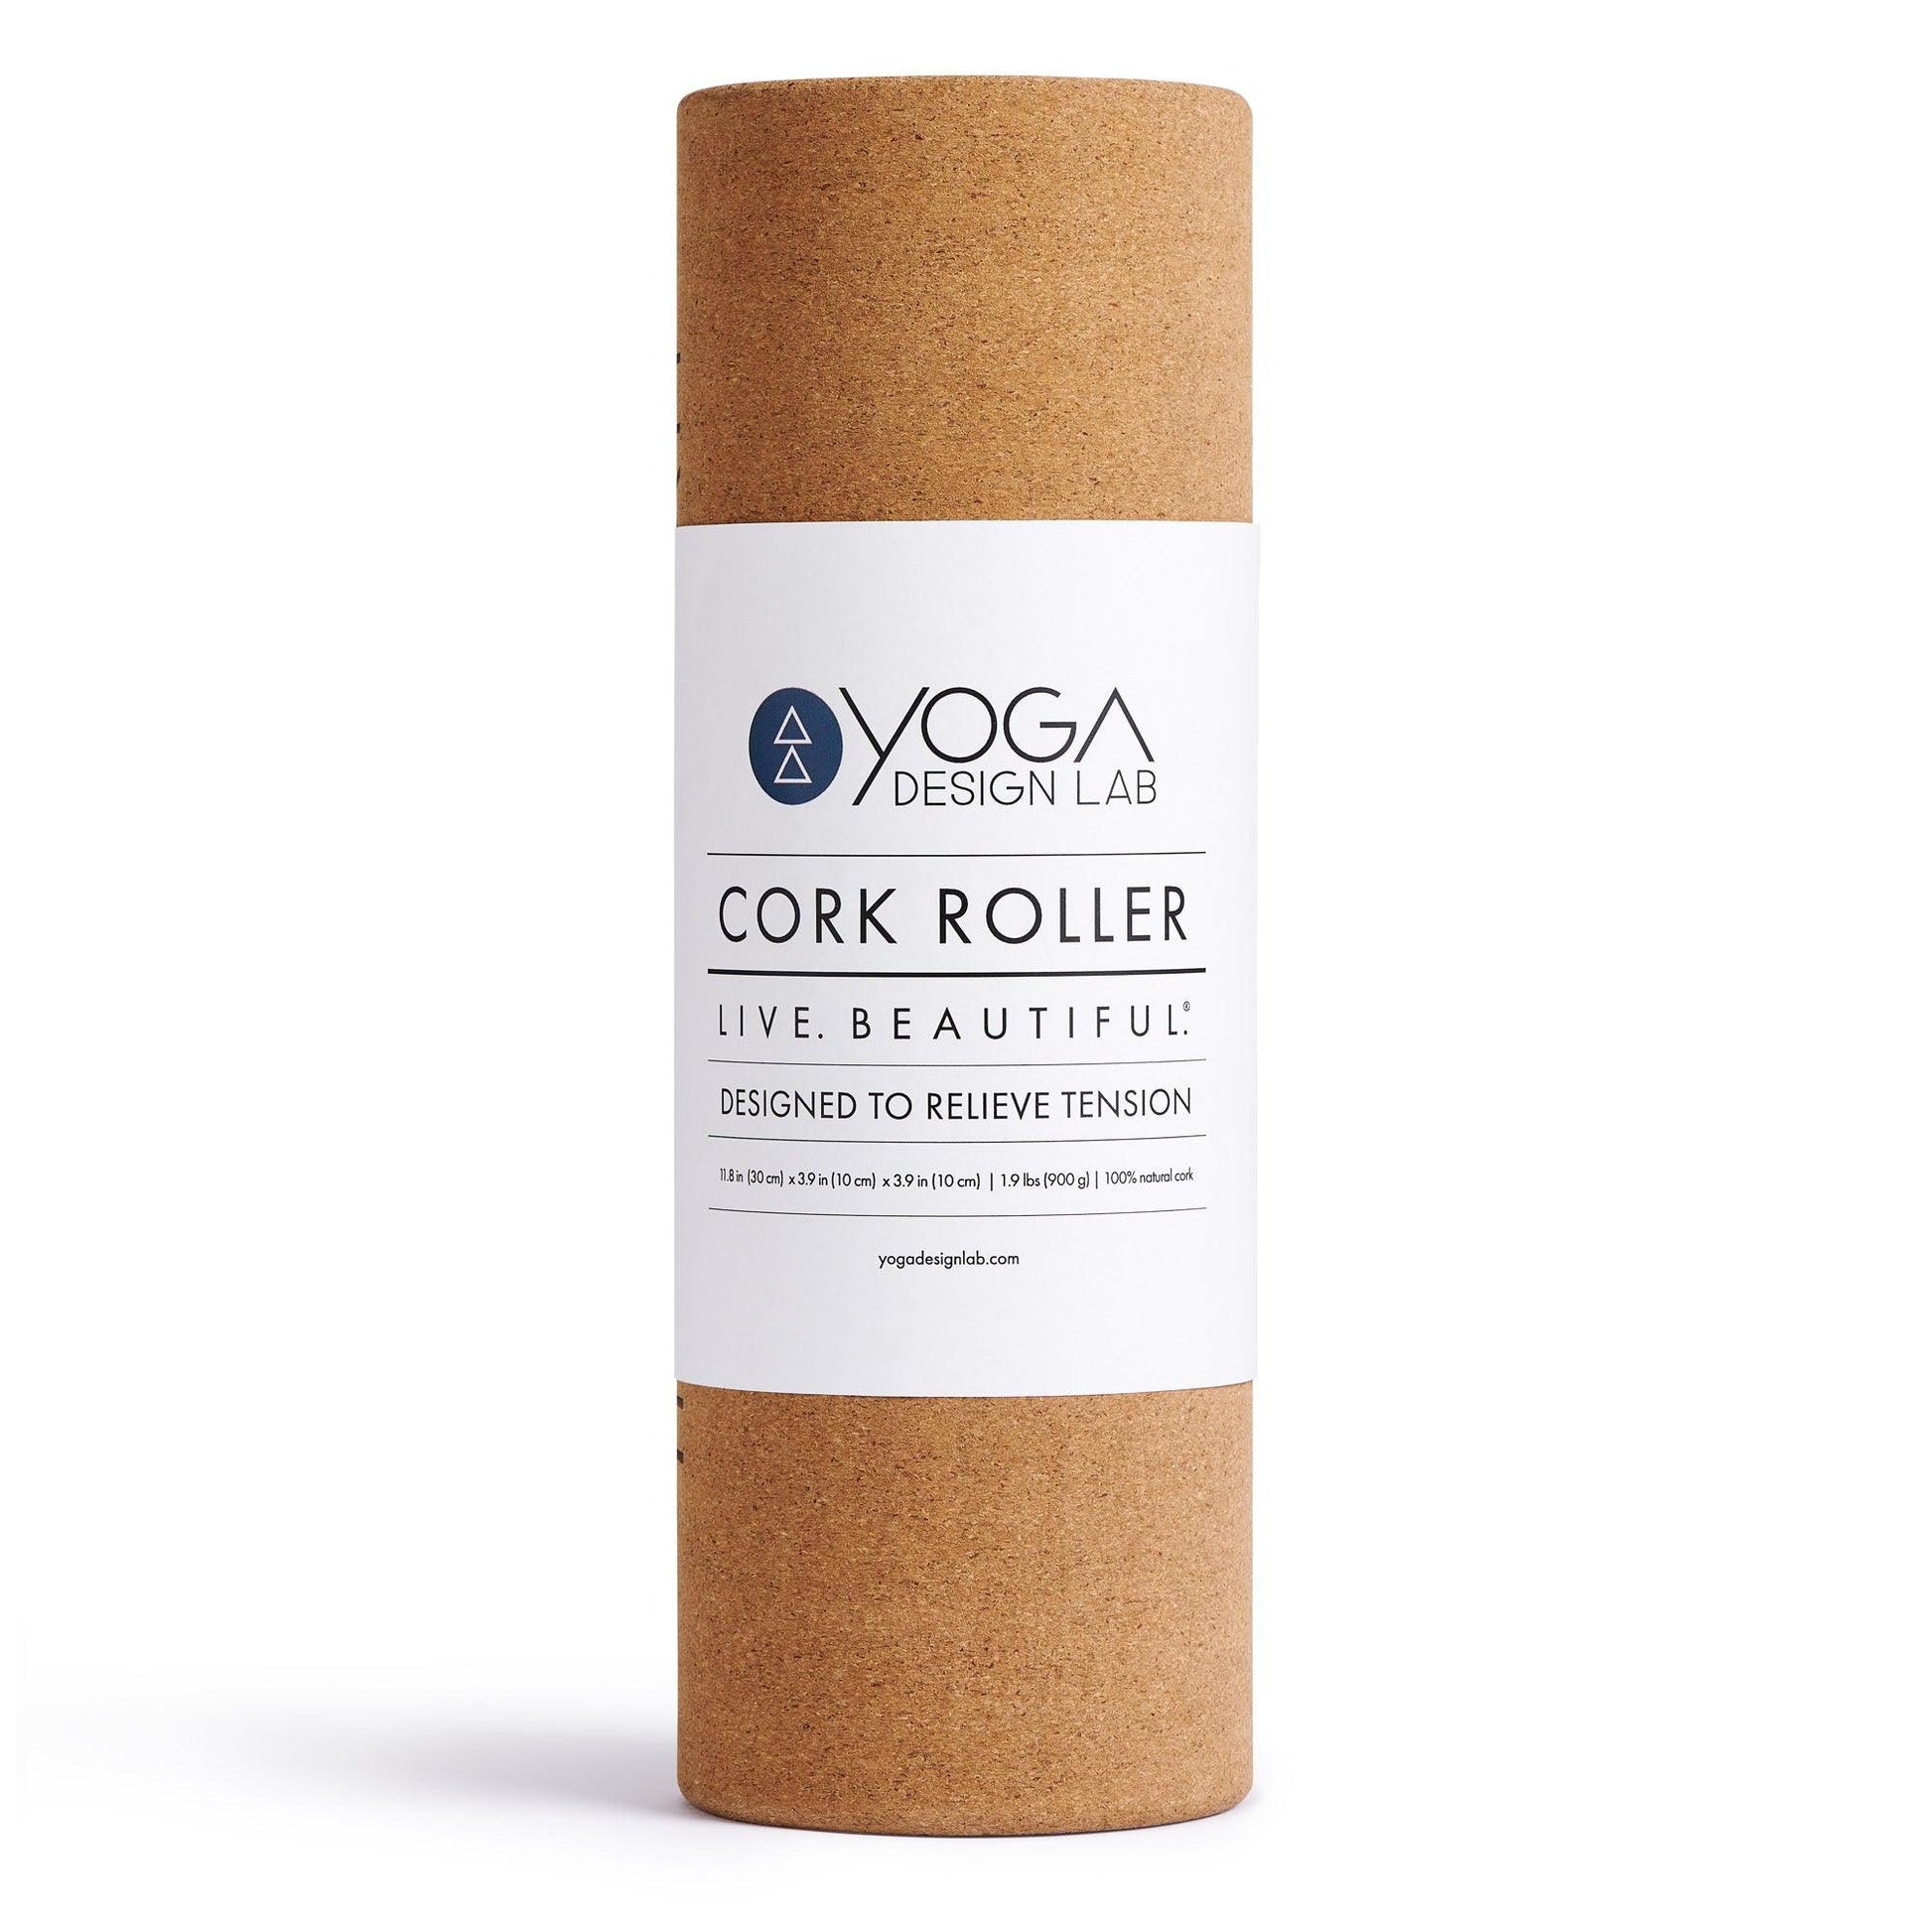 Yoga Cork Roller - Mandala Tonal - Best Muscle Recovery & Physical Therapy Tool - Yoga Design Lab 